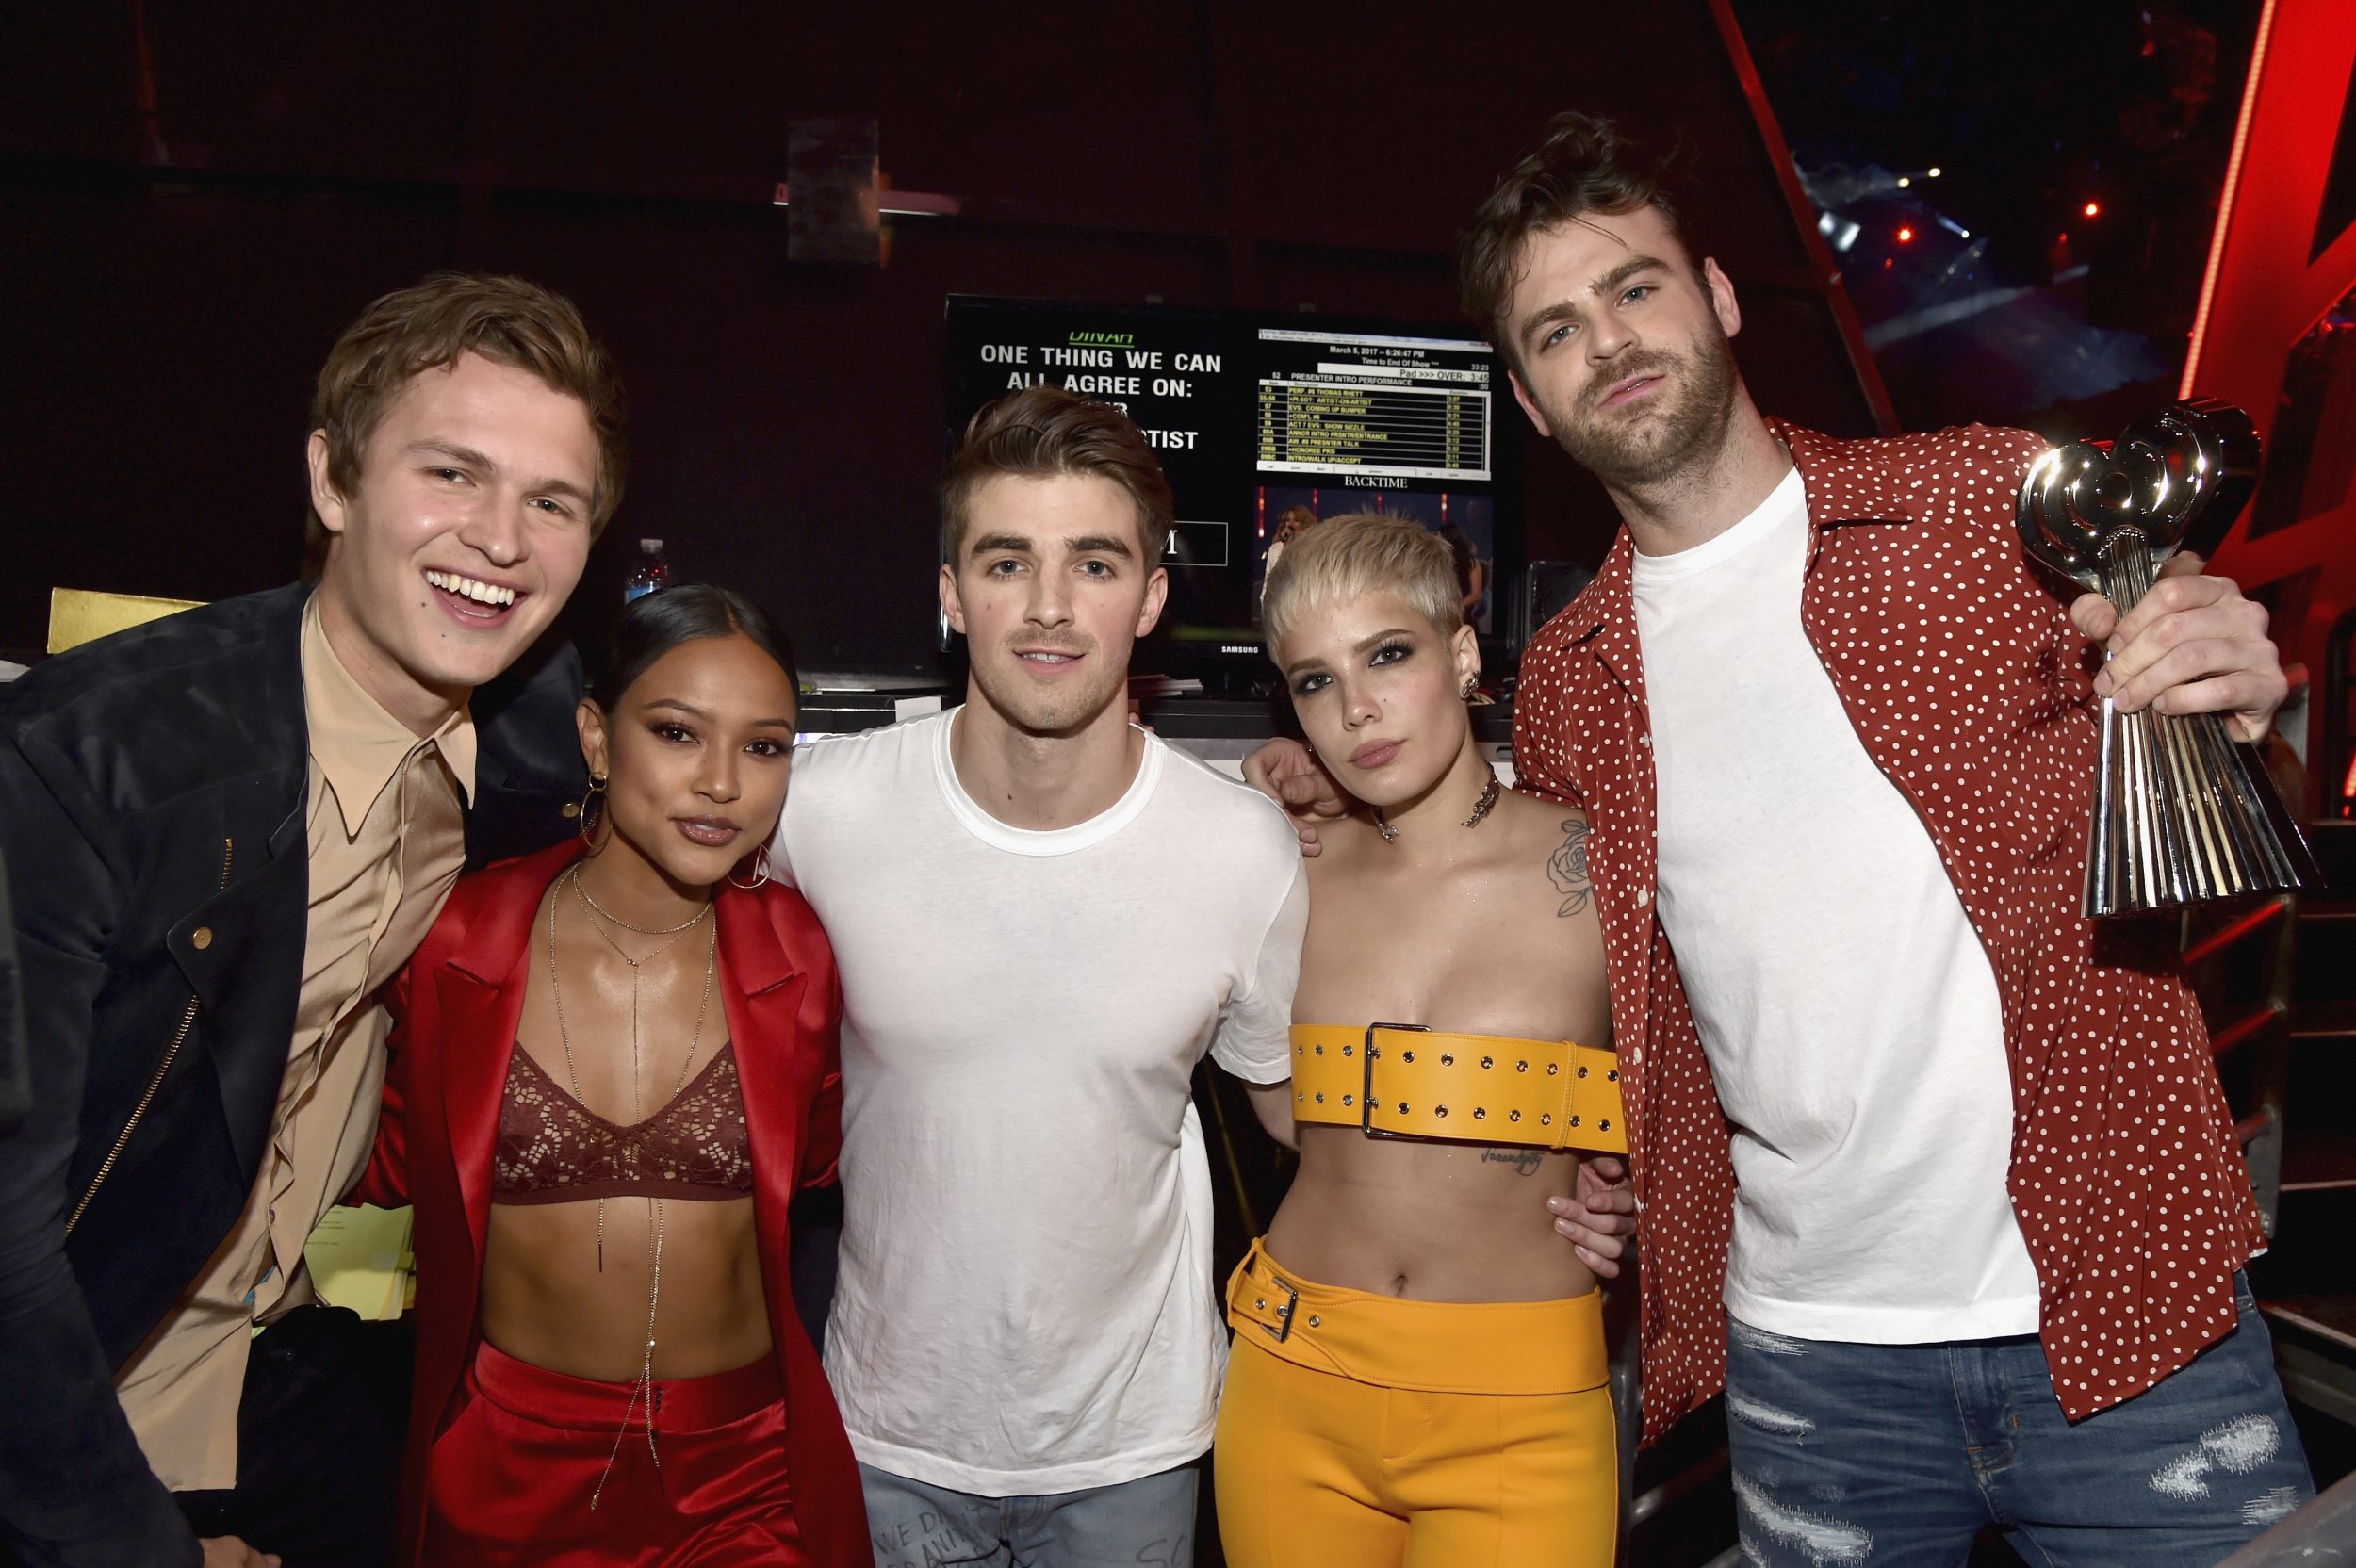 INGLEWOOD, CA - MARCH 05: Actor Ansel Elgort (L) and model Karrueche Tran (2nd L) poses backstage with DJs Drew Taggart (C) and Alex Pall (R) of The Chainsmokers and singer Halsey (2nd R), winners of Dance Song of the Year for 'Closer,' at the 2017 iHeartRadio Music Awards which broadcast live on Turner's TBS, TNT, and truTV at The Forum on March 5, 2017 in Inglewood, California. (Photo by Frazer Harrison/Getty Images for iHeartMedia) *** Local Caption *** Ansel Elgort; Drew Taggart; Alex Pall; Halsey; Karrueche Tran